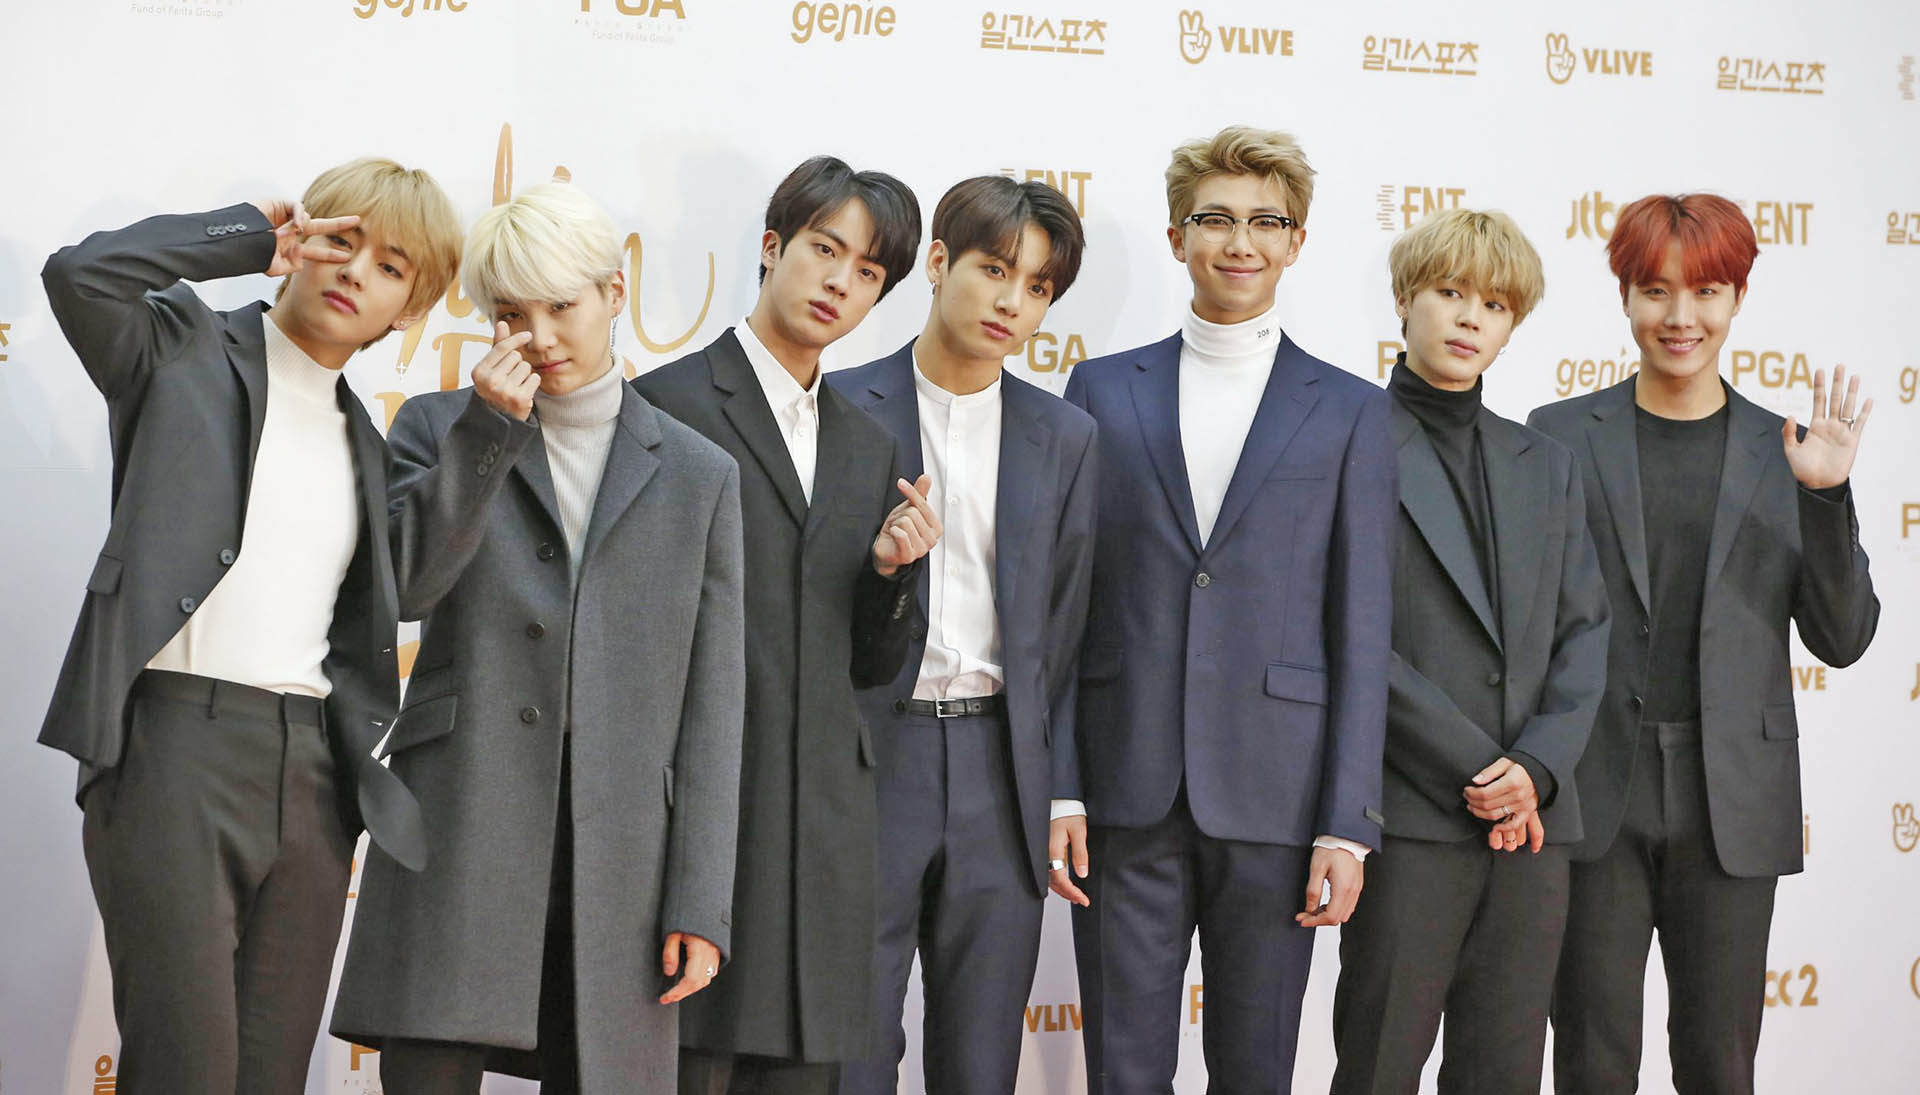 Golden Disc Awards 2019 will be on January 5 to 6, 2019, two-day long